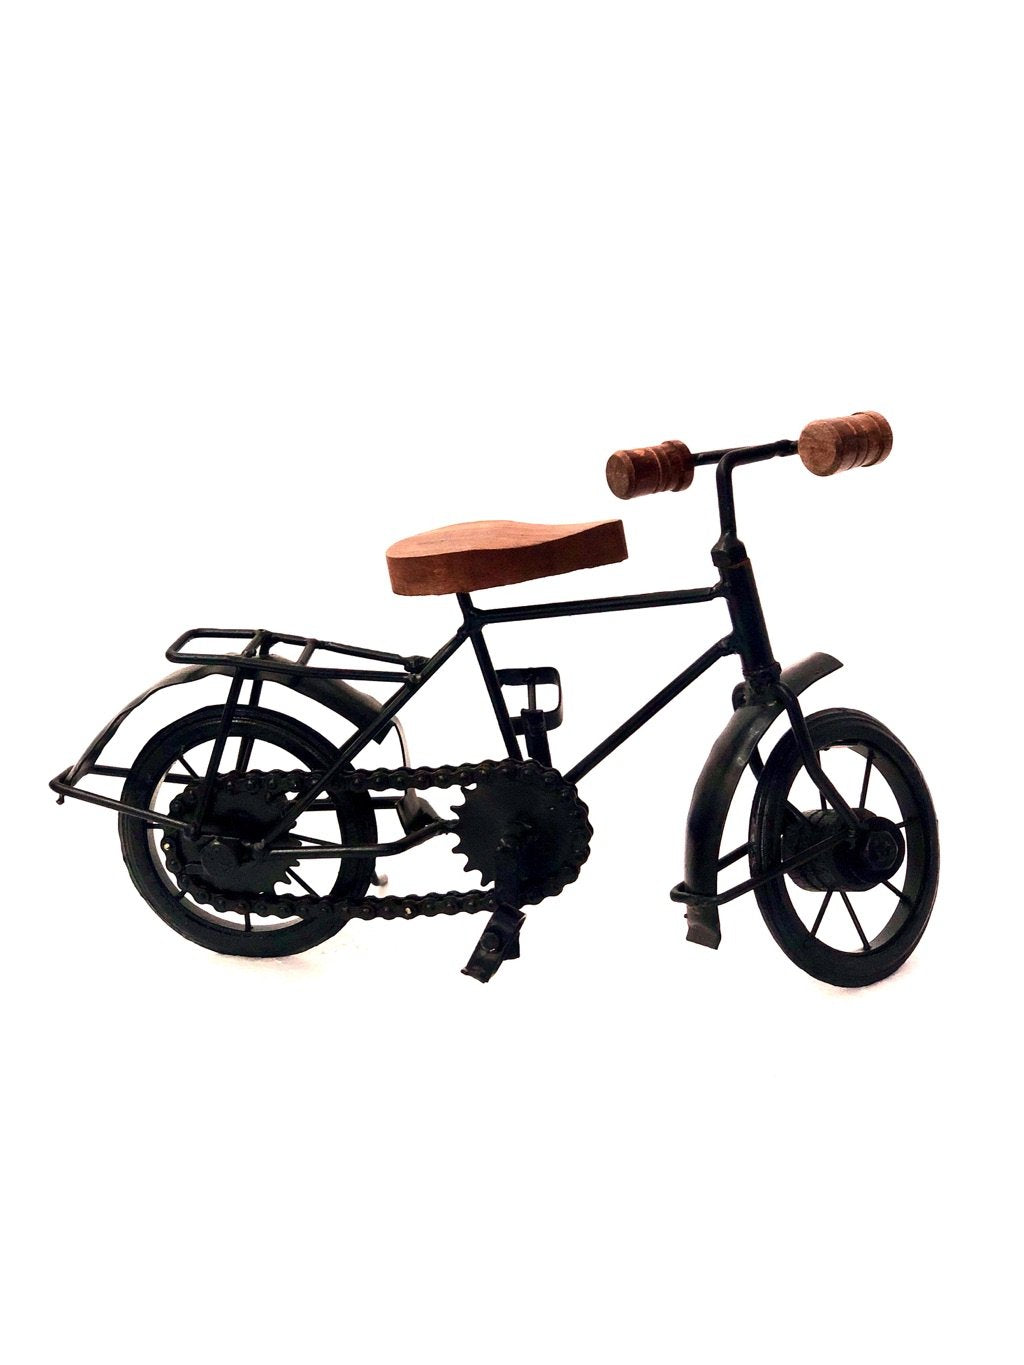 Vintage Showpiece Metal Cycle For All Home Decor Purpose Tamrapatra